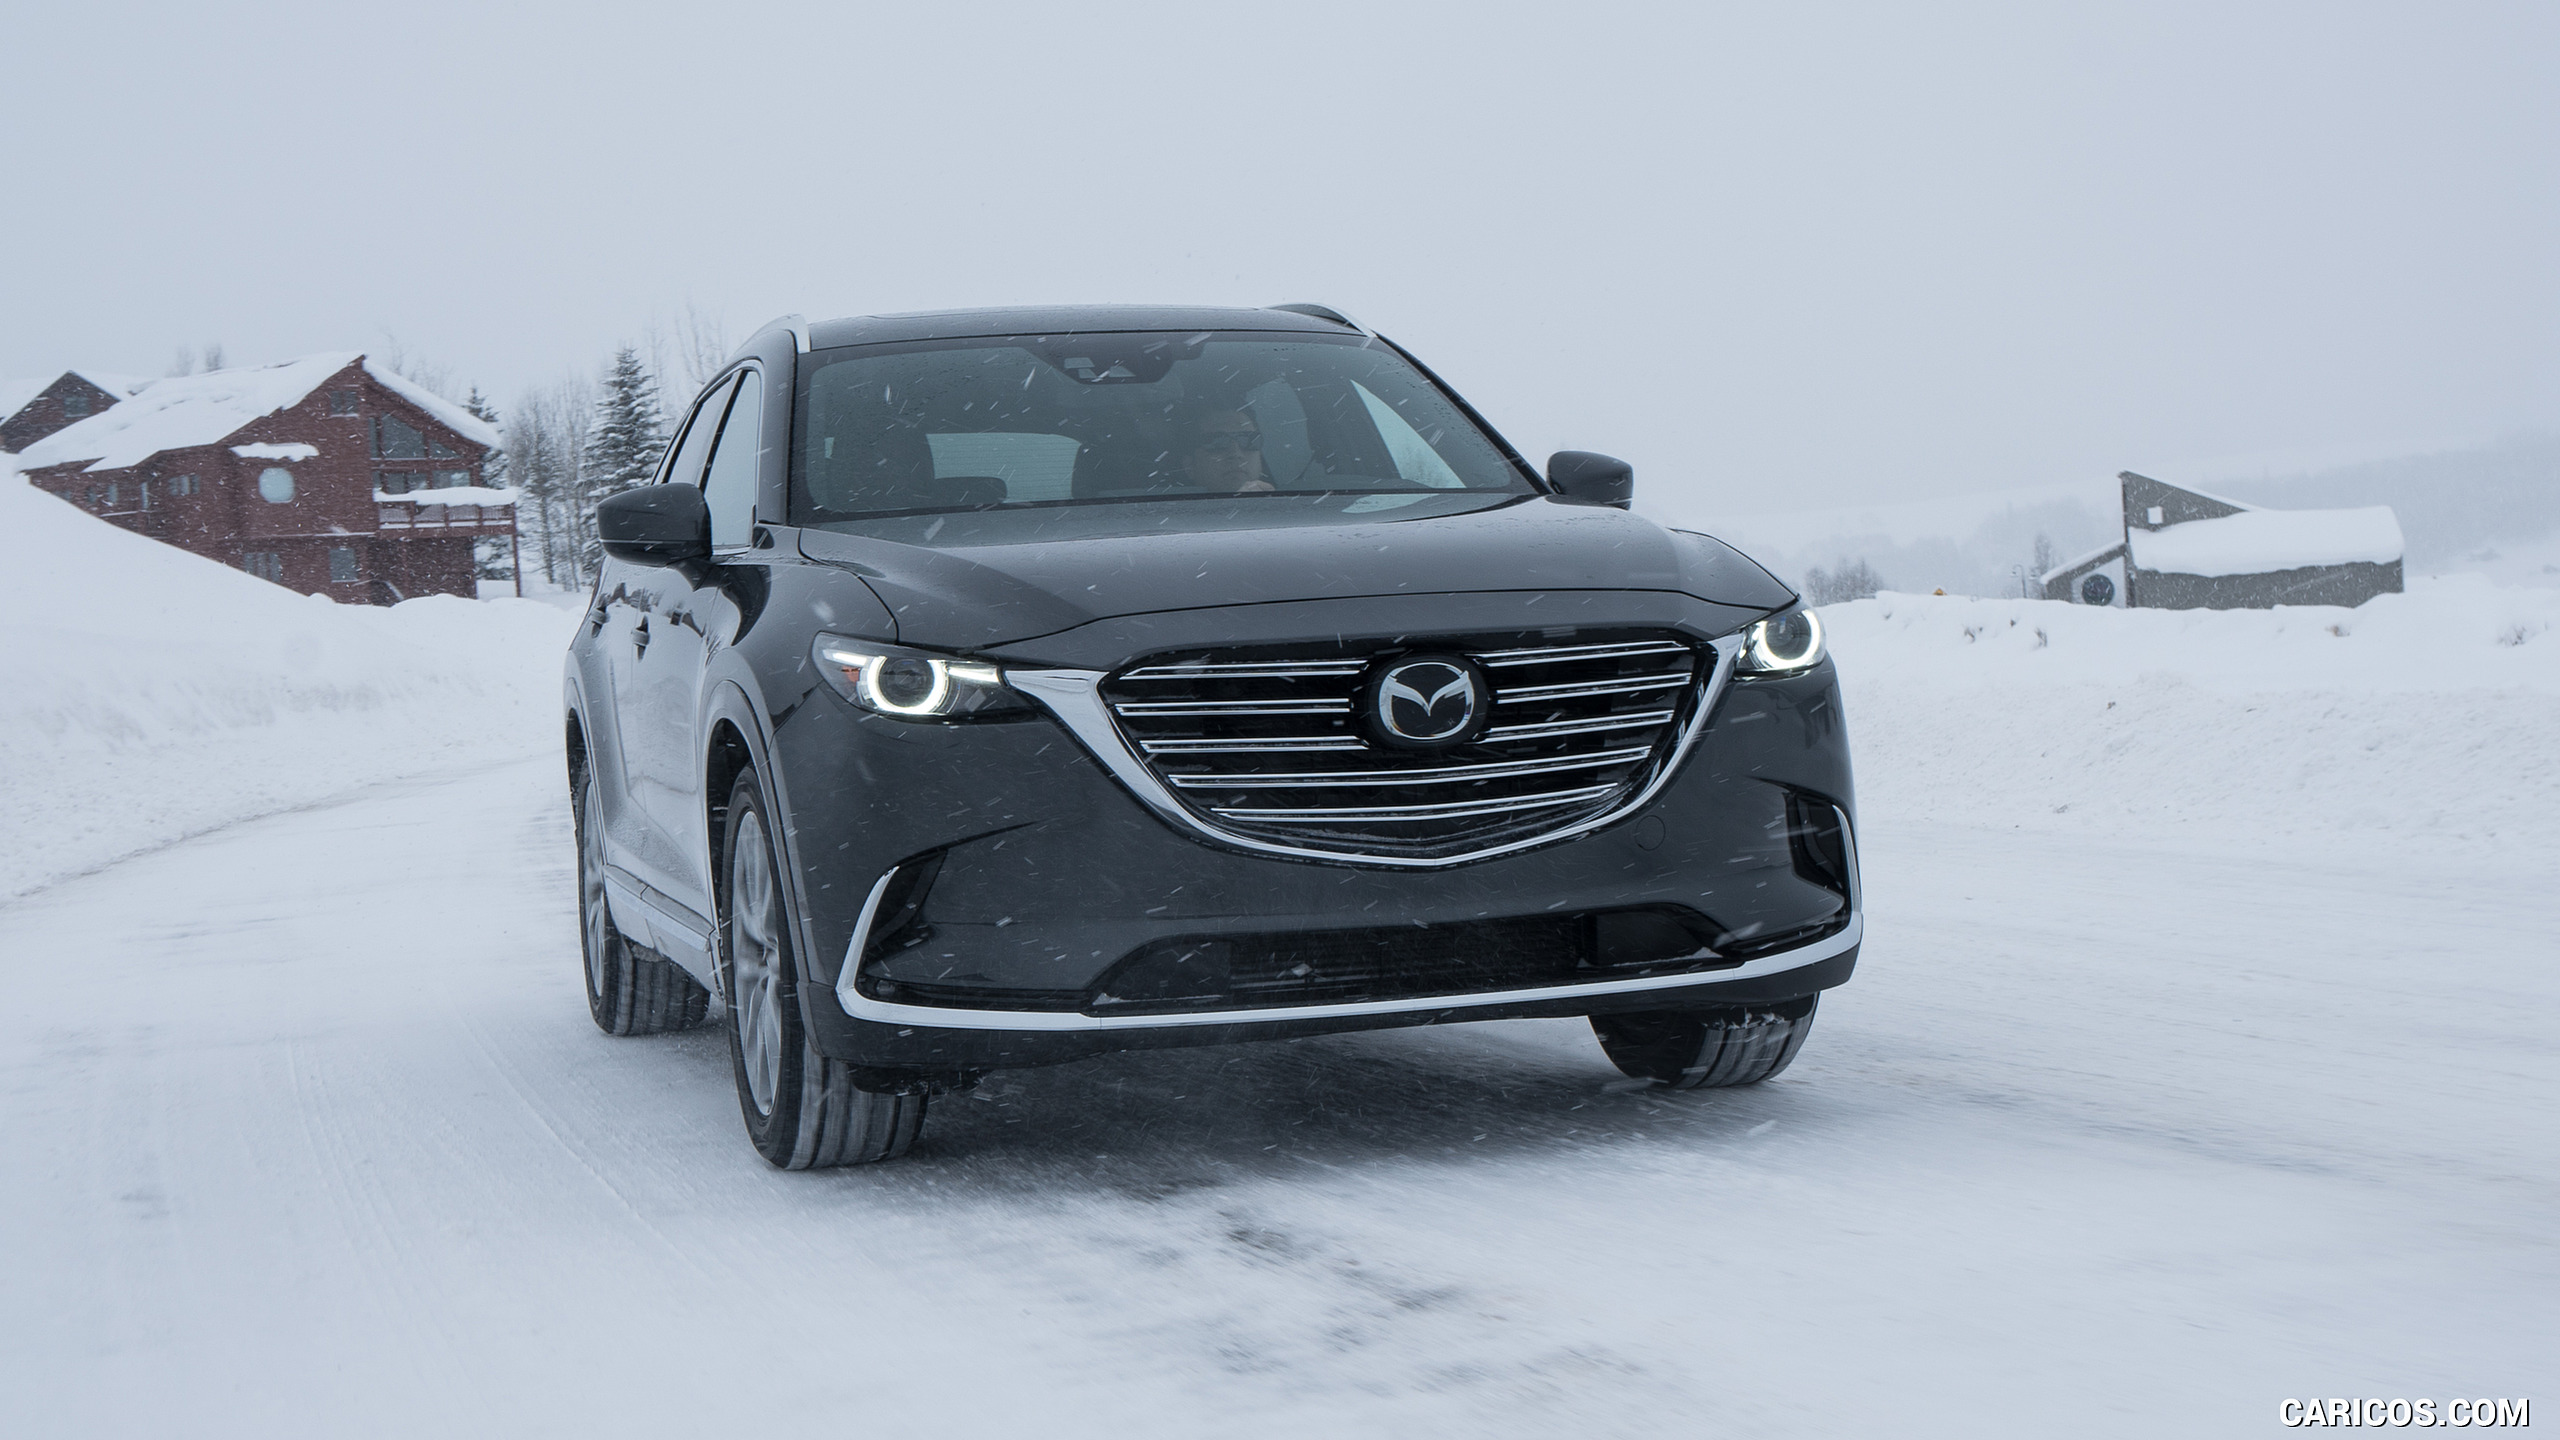 2016 Mazda CX-9 in Snow - Front, #64 of 69